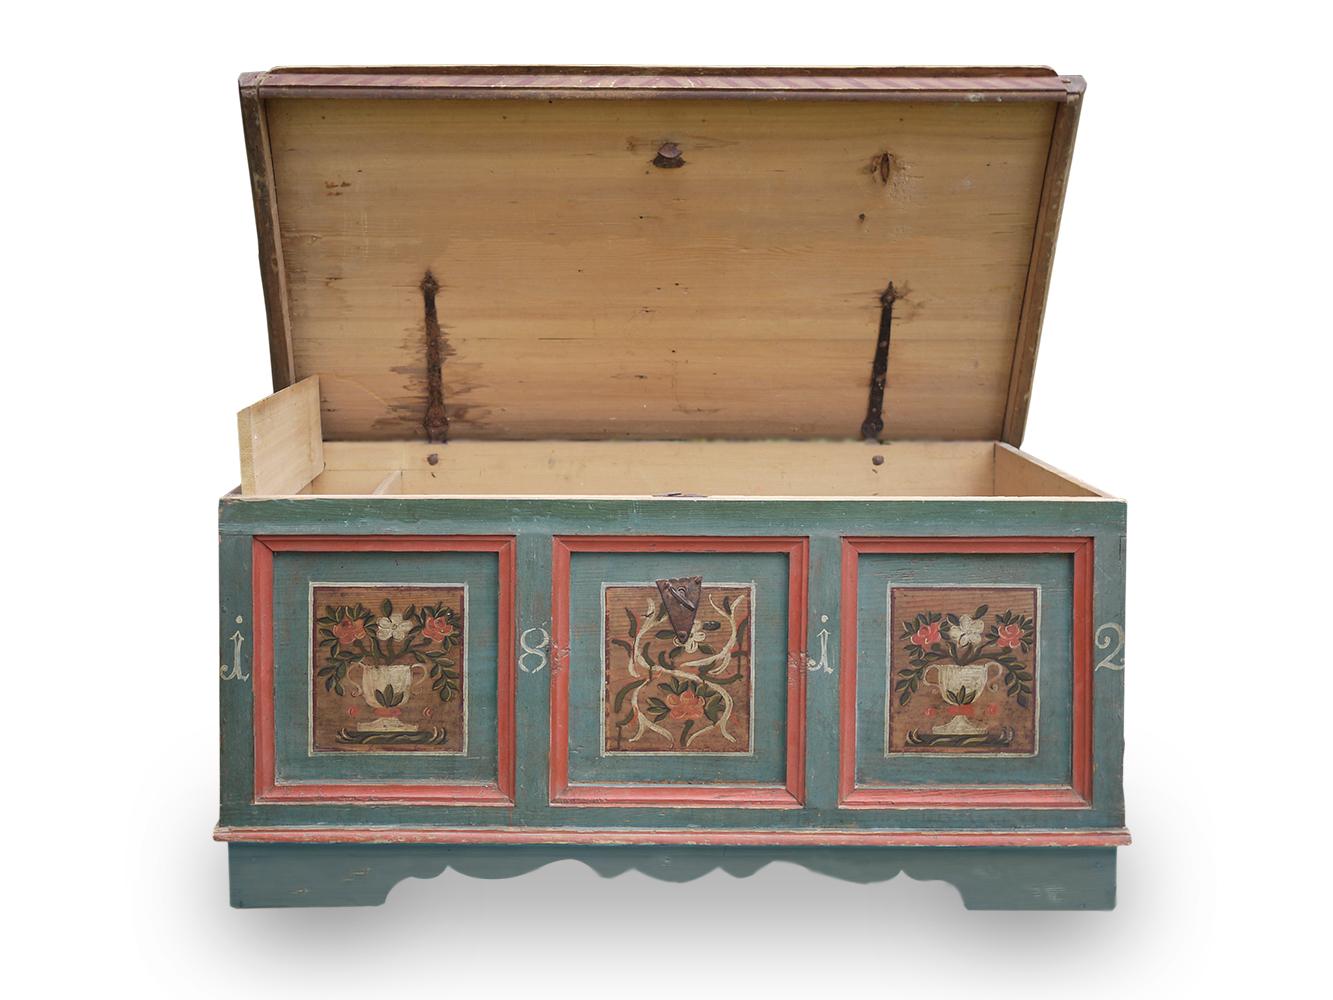 Northern Italian (Alpine) painted chest

Measures:
H 66cm, W 136cm, D 68cm
H 26 in, W 53.5 in, D 26.8 in.

Antique painted alpine chest, dated 1812, not yet restored.
On the front there are three framed panels, enriched with flower cups. The